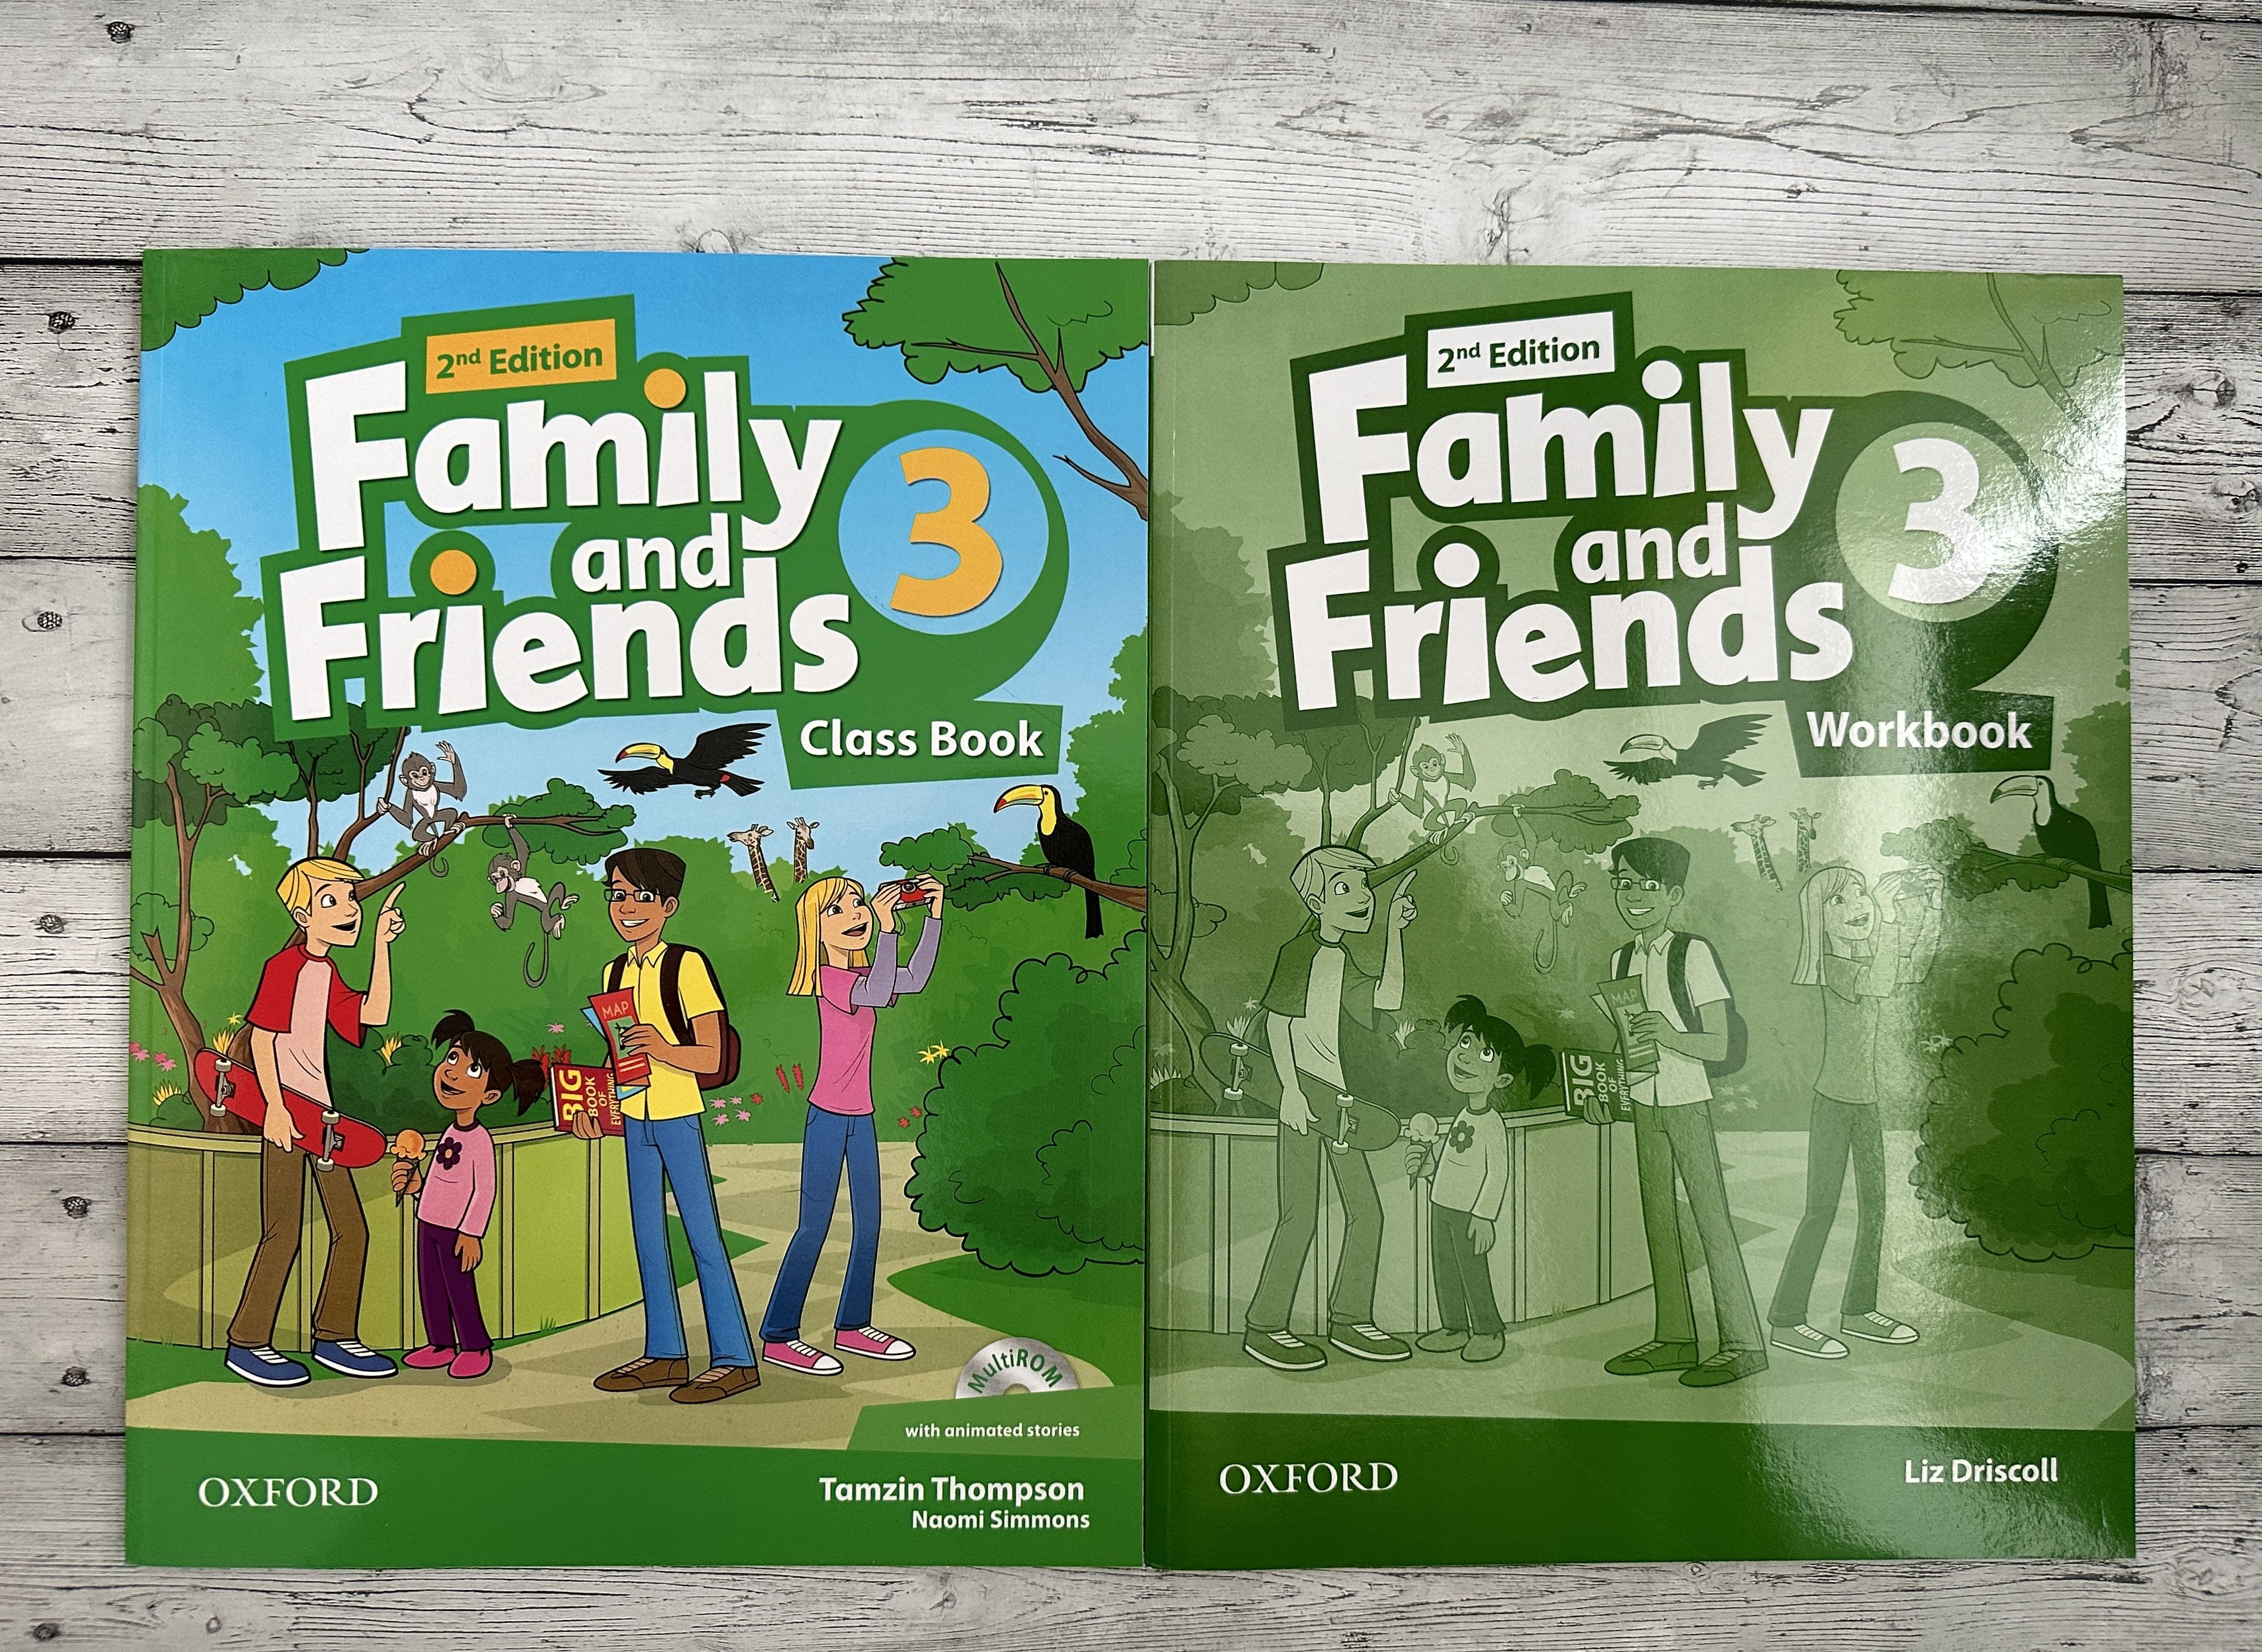 Английский язык family and friends 3 workbook. Фэмили френдс 3. Family and friends 3 Workbook Оксфорд Liz Driscoll. 2nd Edition Family friends Workbook Oxford Naomi Simmons. Family and friends 3 class book.